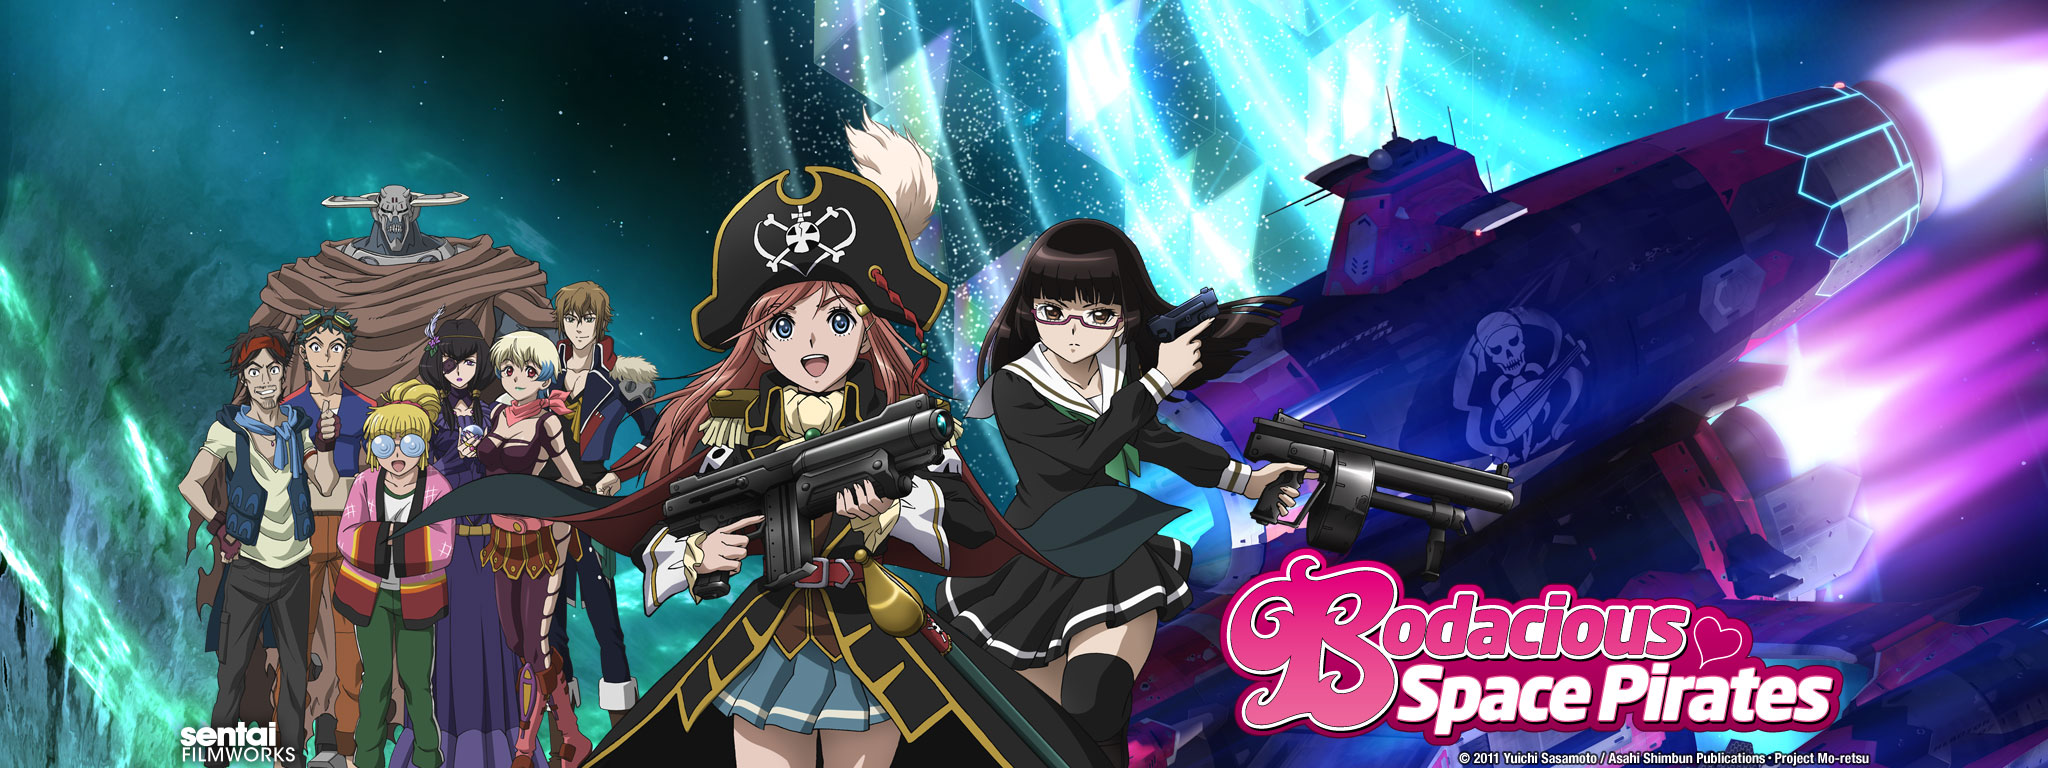 Title Art for Bodacious Space Pirates